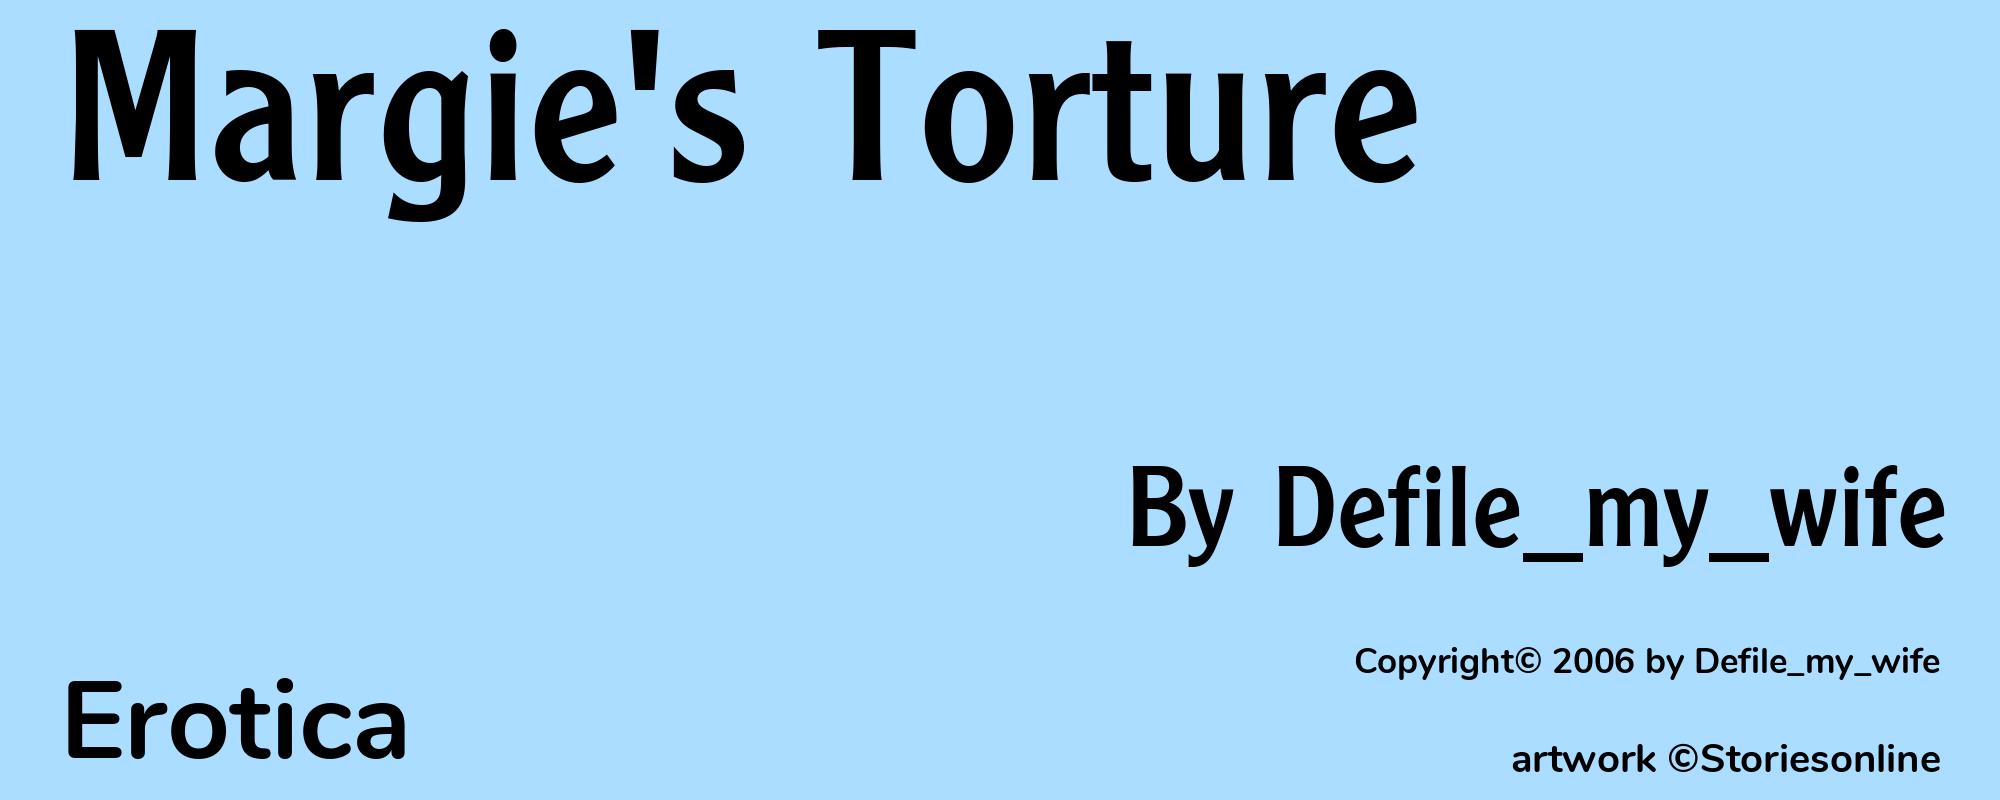 Margie's Torture - Cover